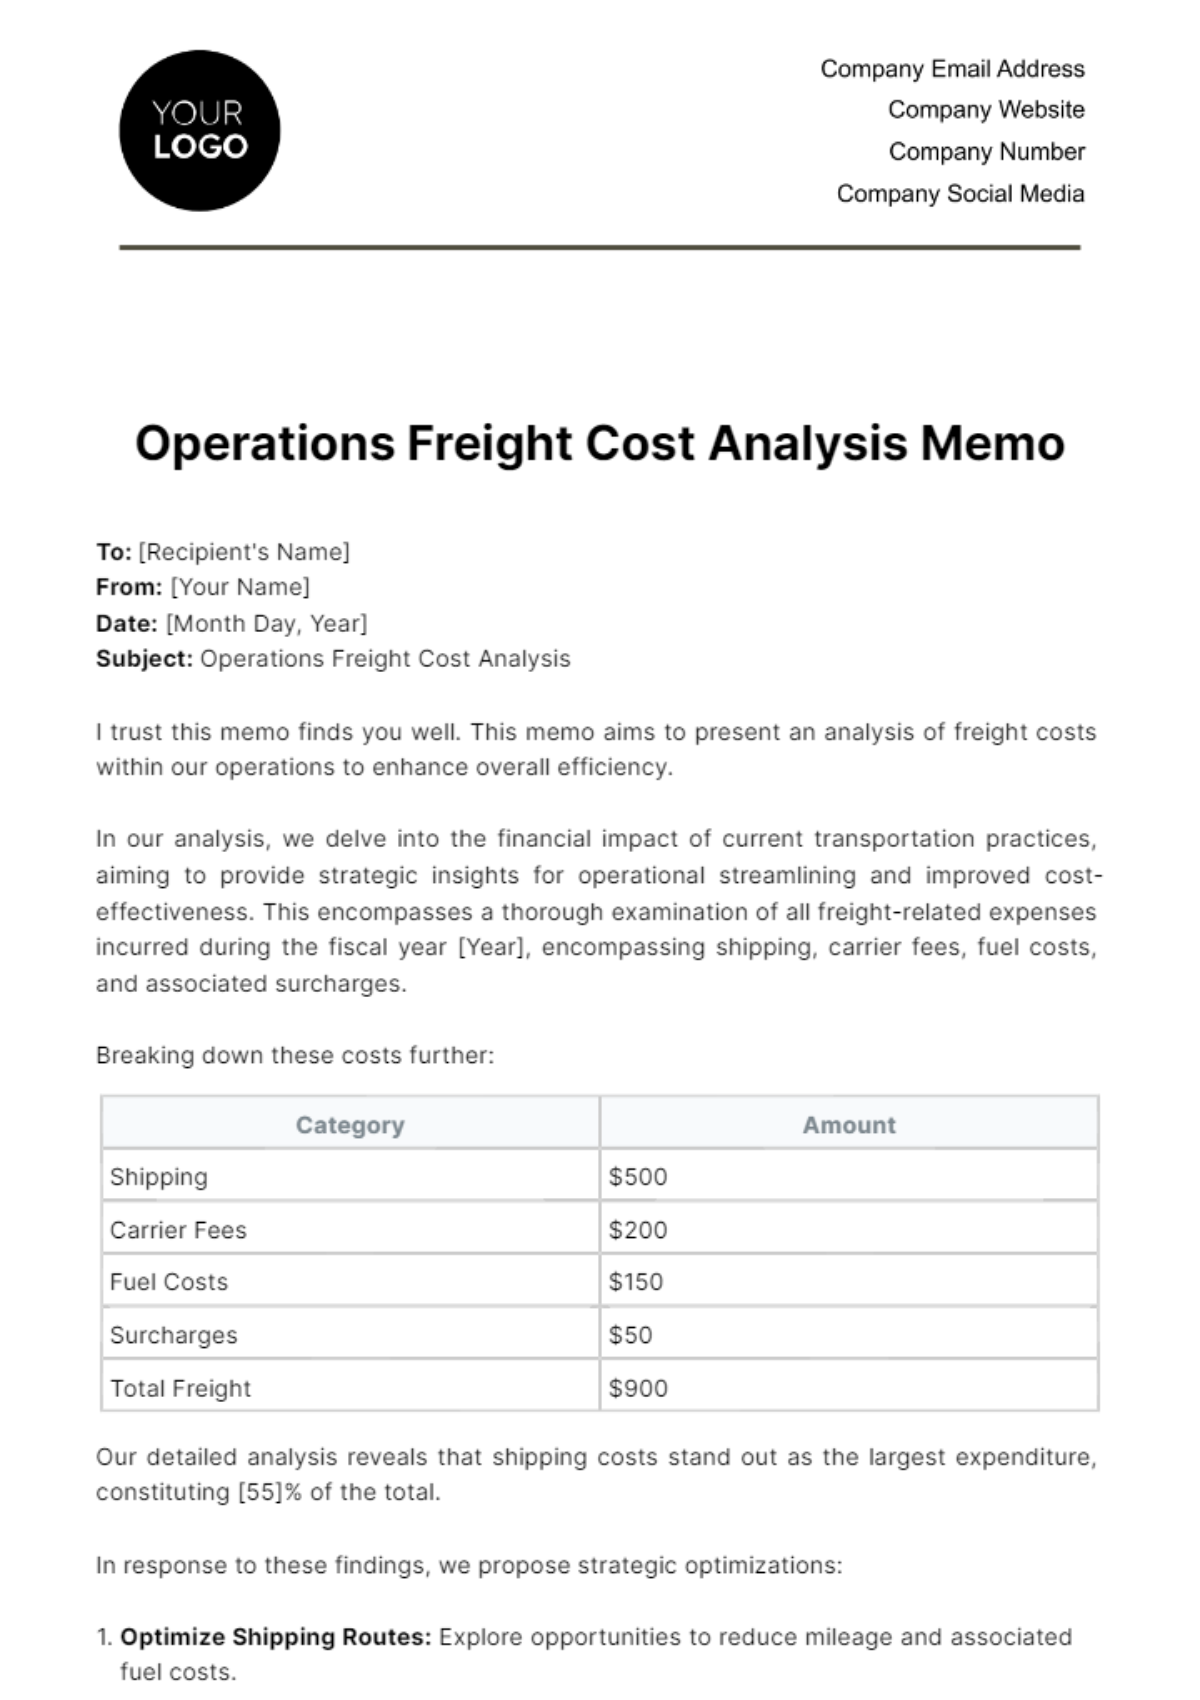 Operations Freight Cost Analysis Memo Template